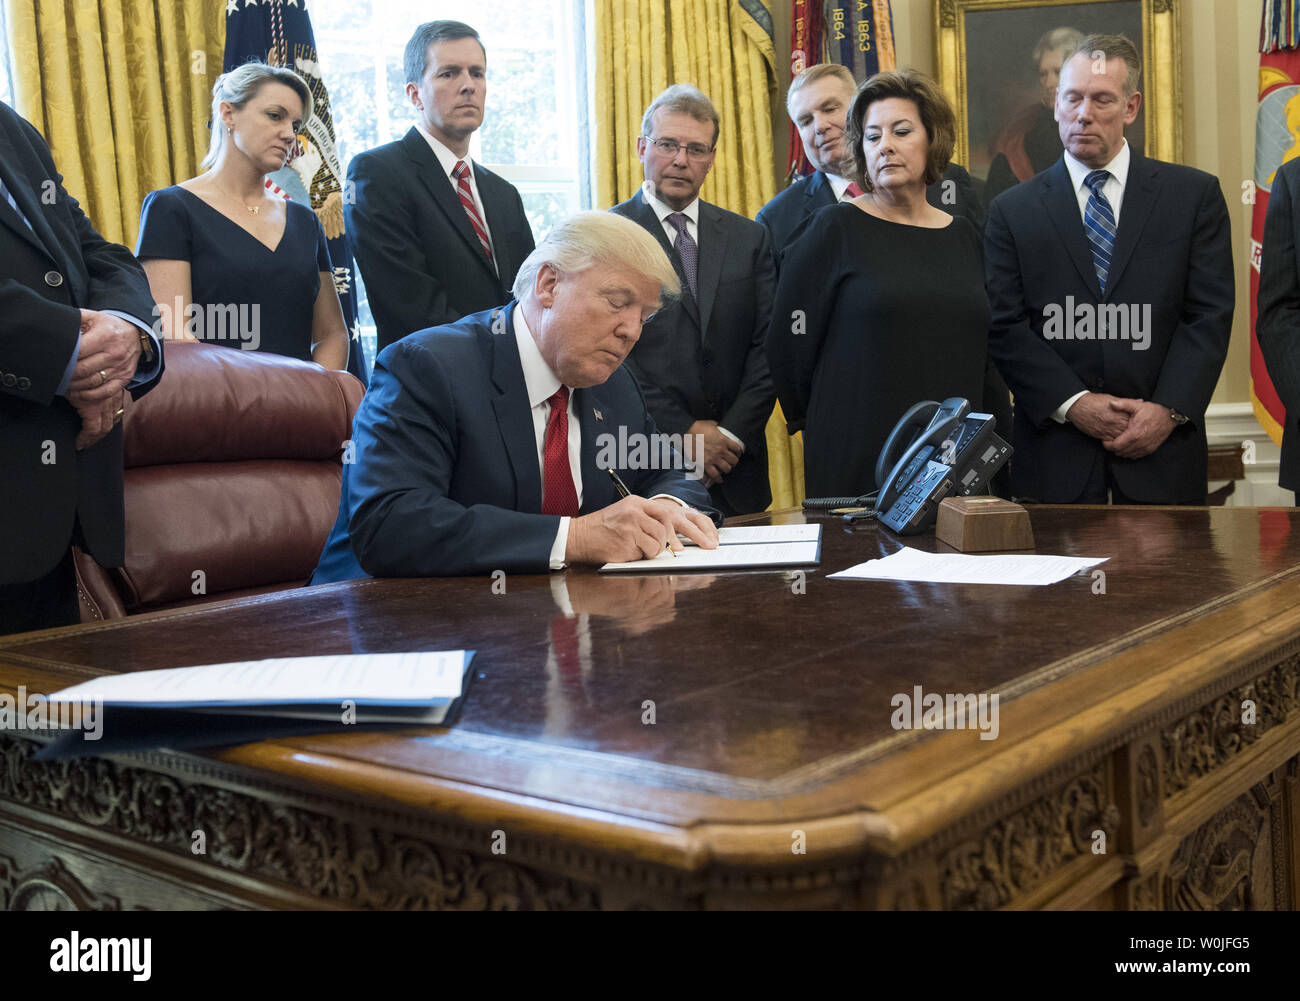 President Donald Trump signs a Memorandum Regarding the Investigation  Pursuant to Section 232(B) of the Trade Expansion Act, during a ceremony in  the Oval Office at the White House in Washington, D.C.